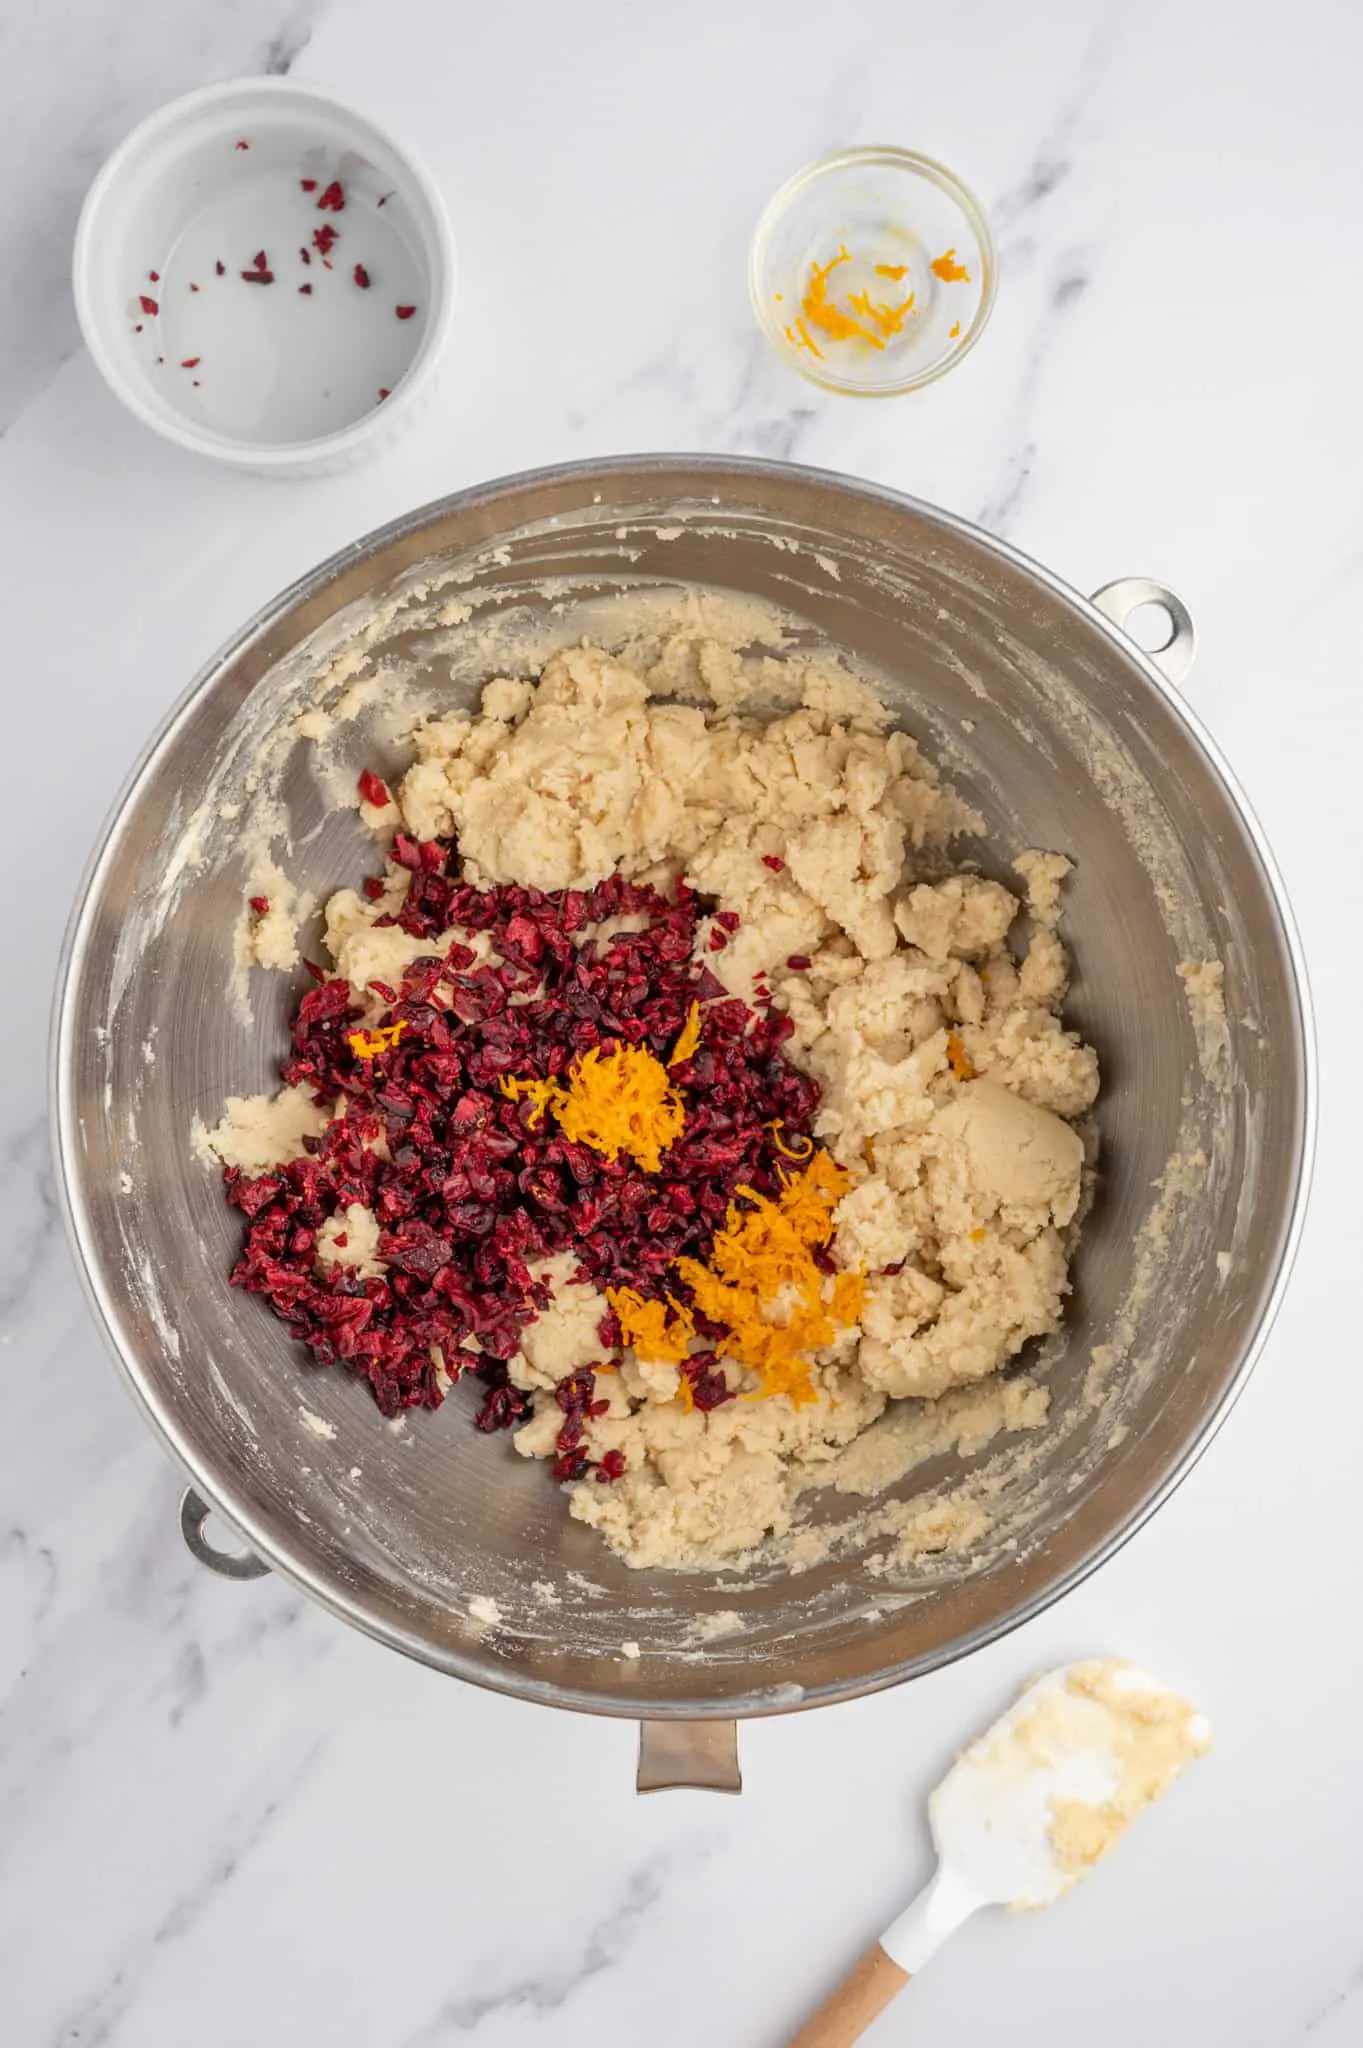 orange zest and dried cranberries on top of shortbread cookie dough in a mixing bowl